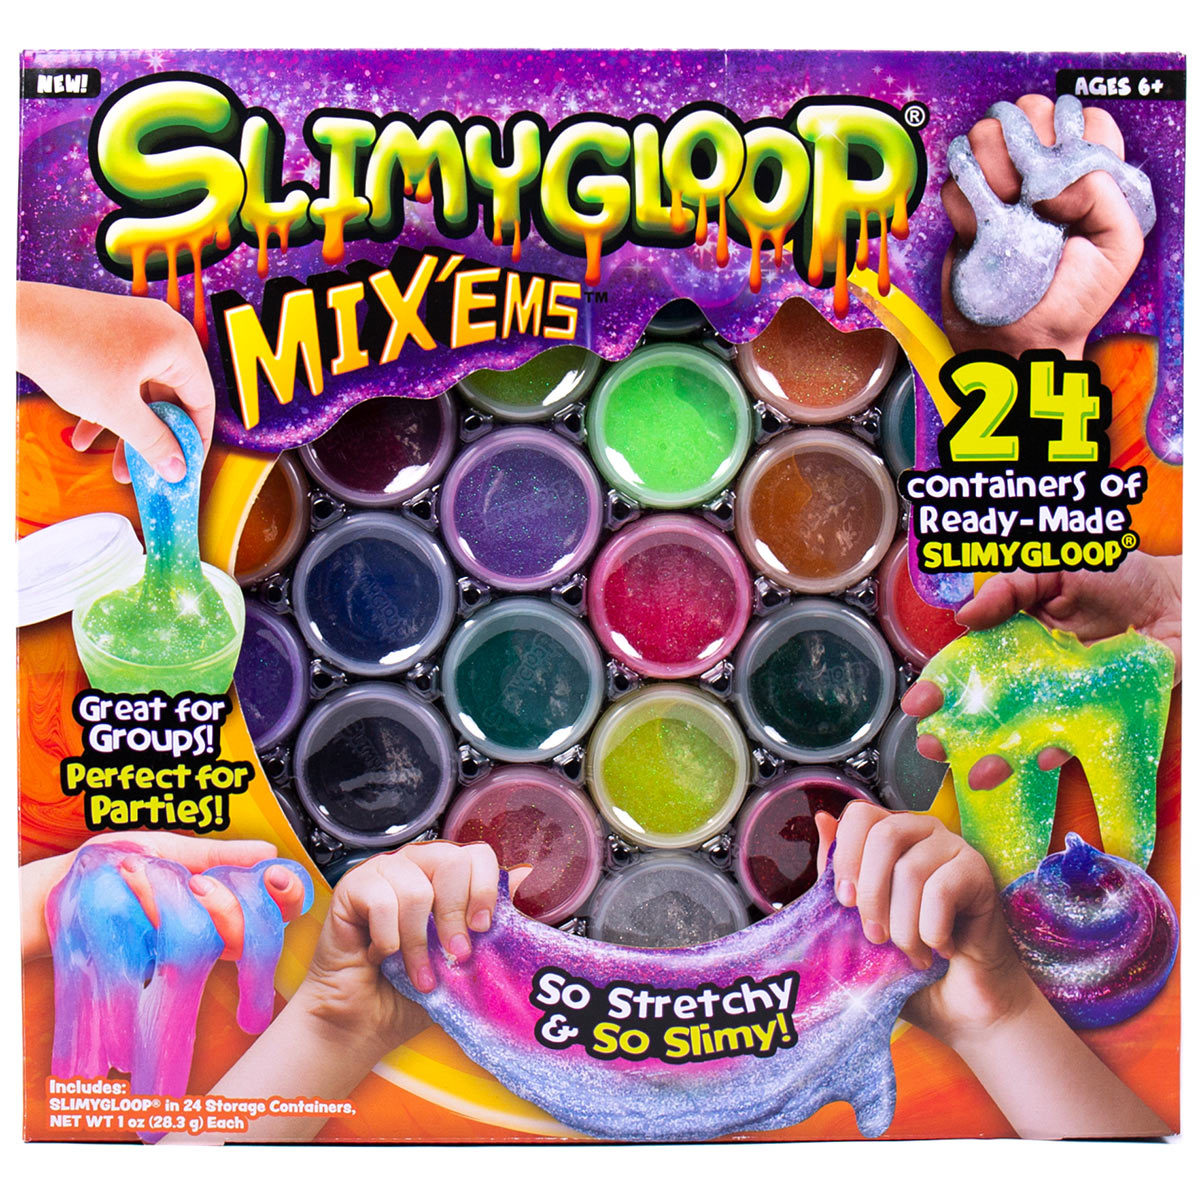 Slimy Gloop Mixems 24 pack boxed image